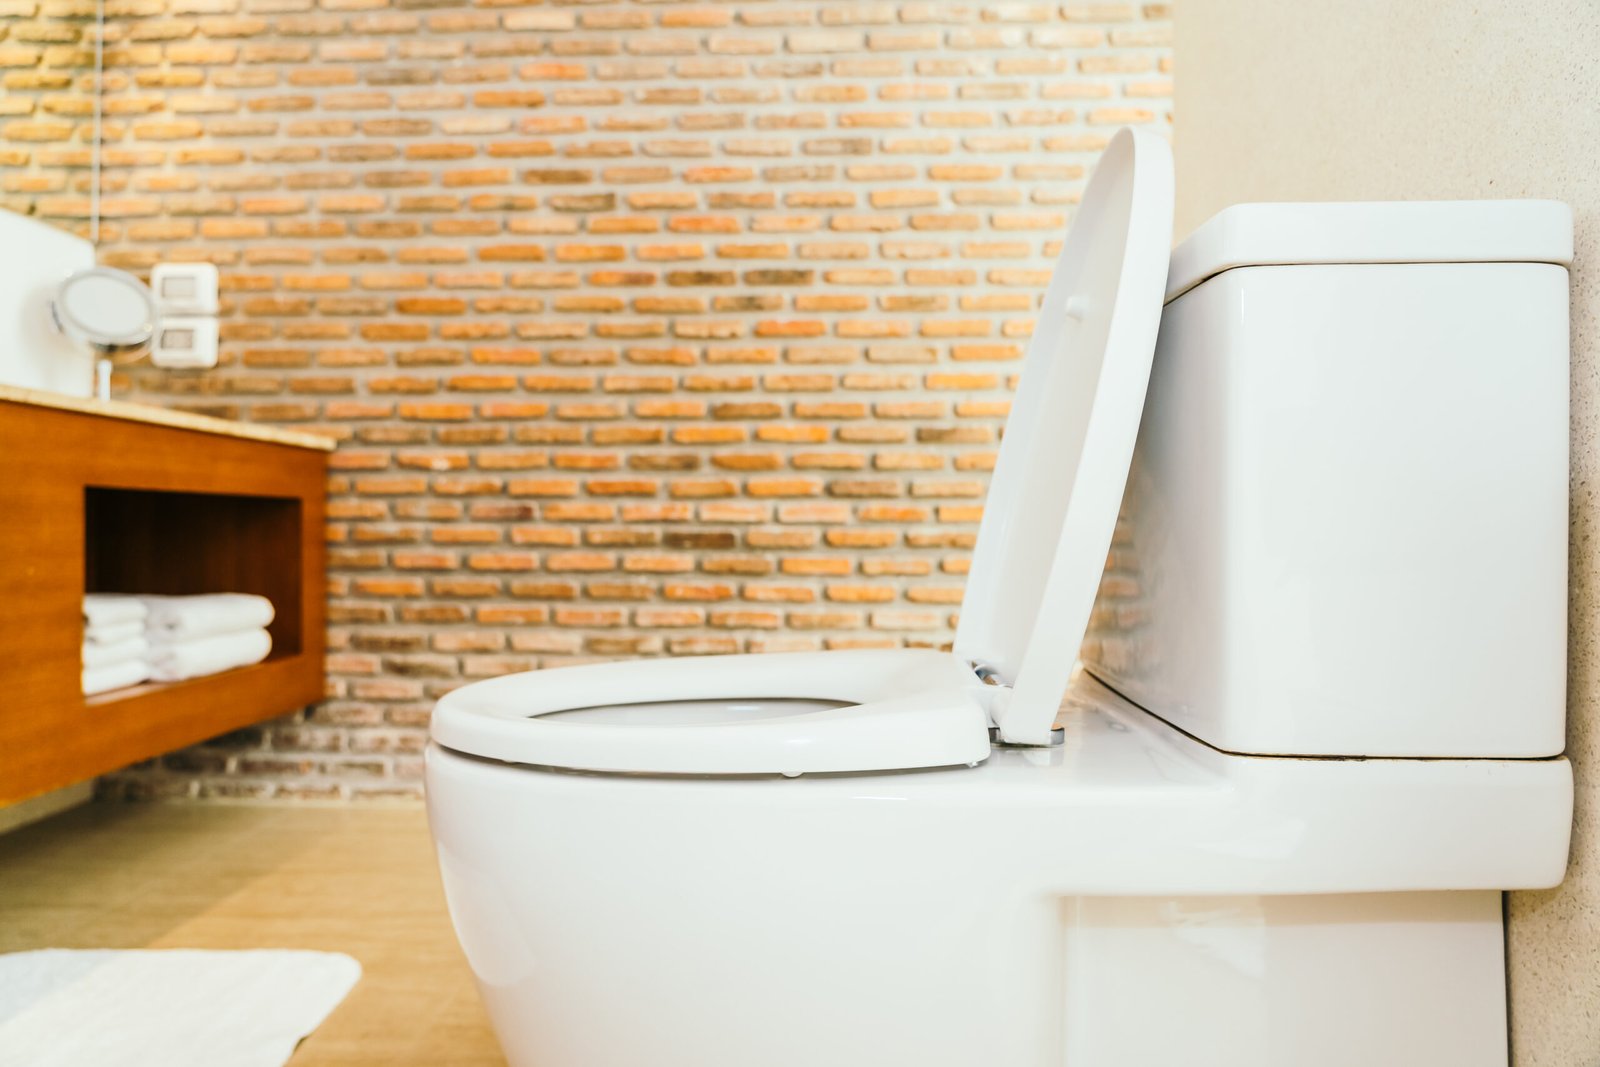 How to Clear a Clogged Toilet Without a Plunger